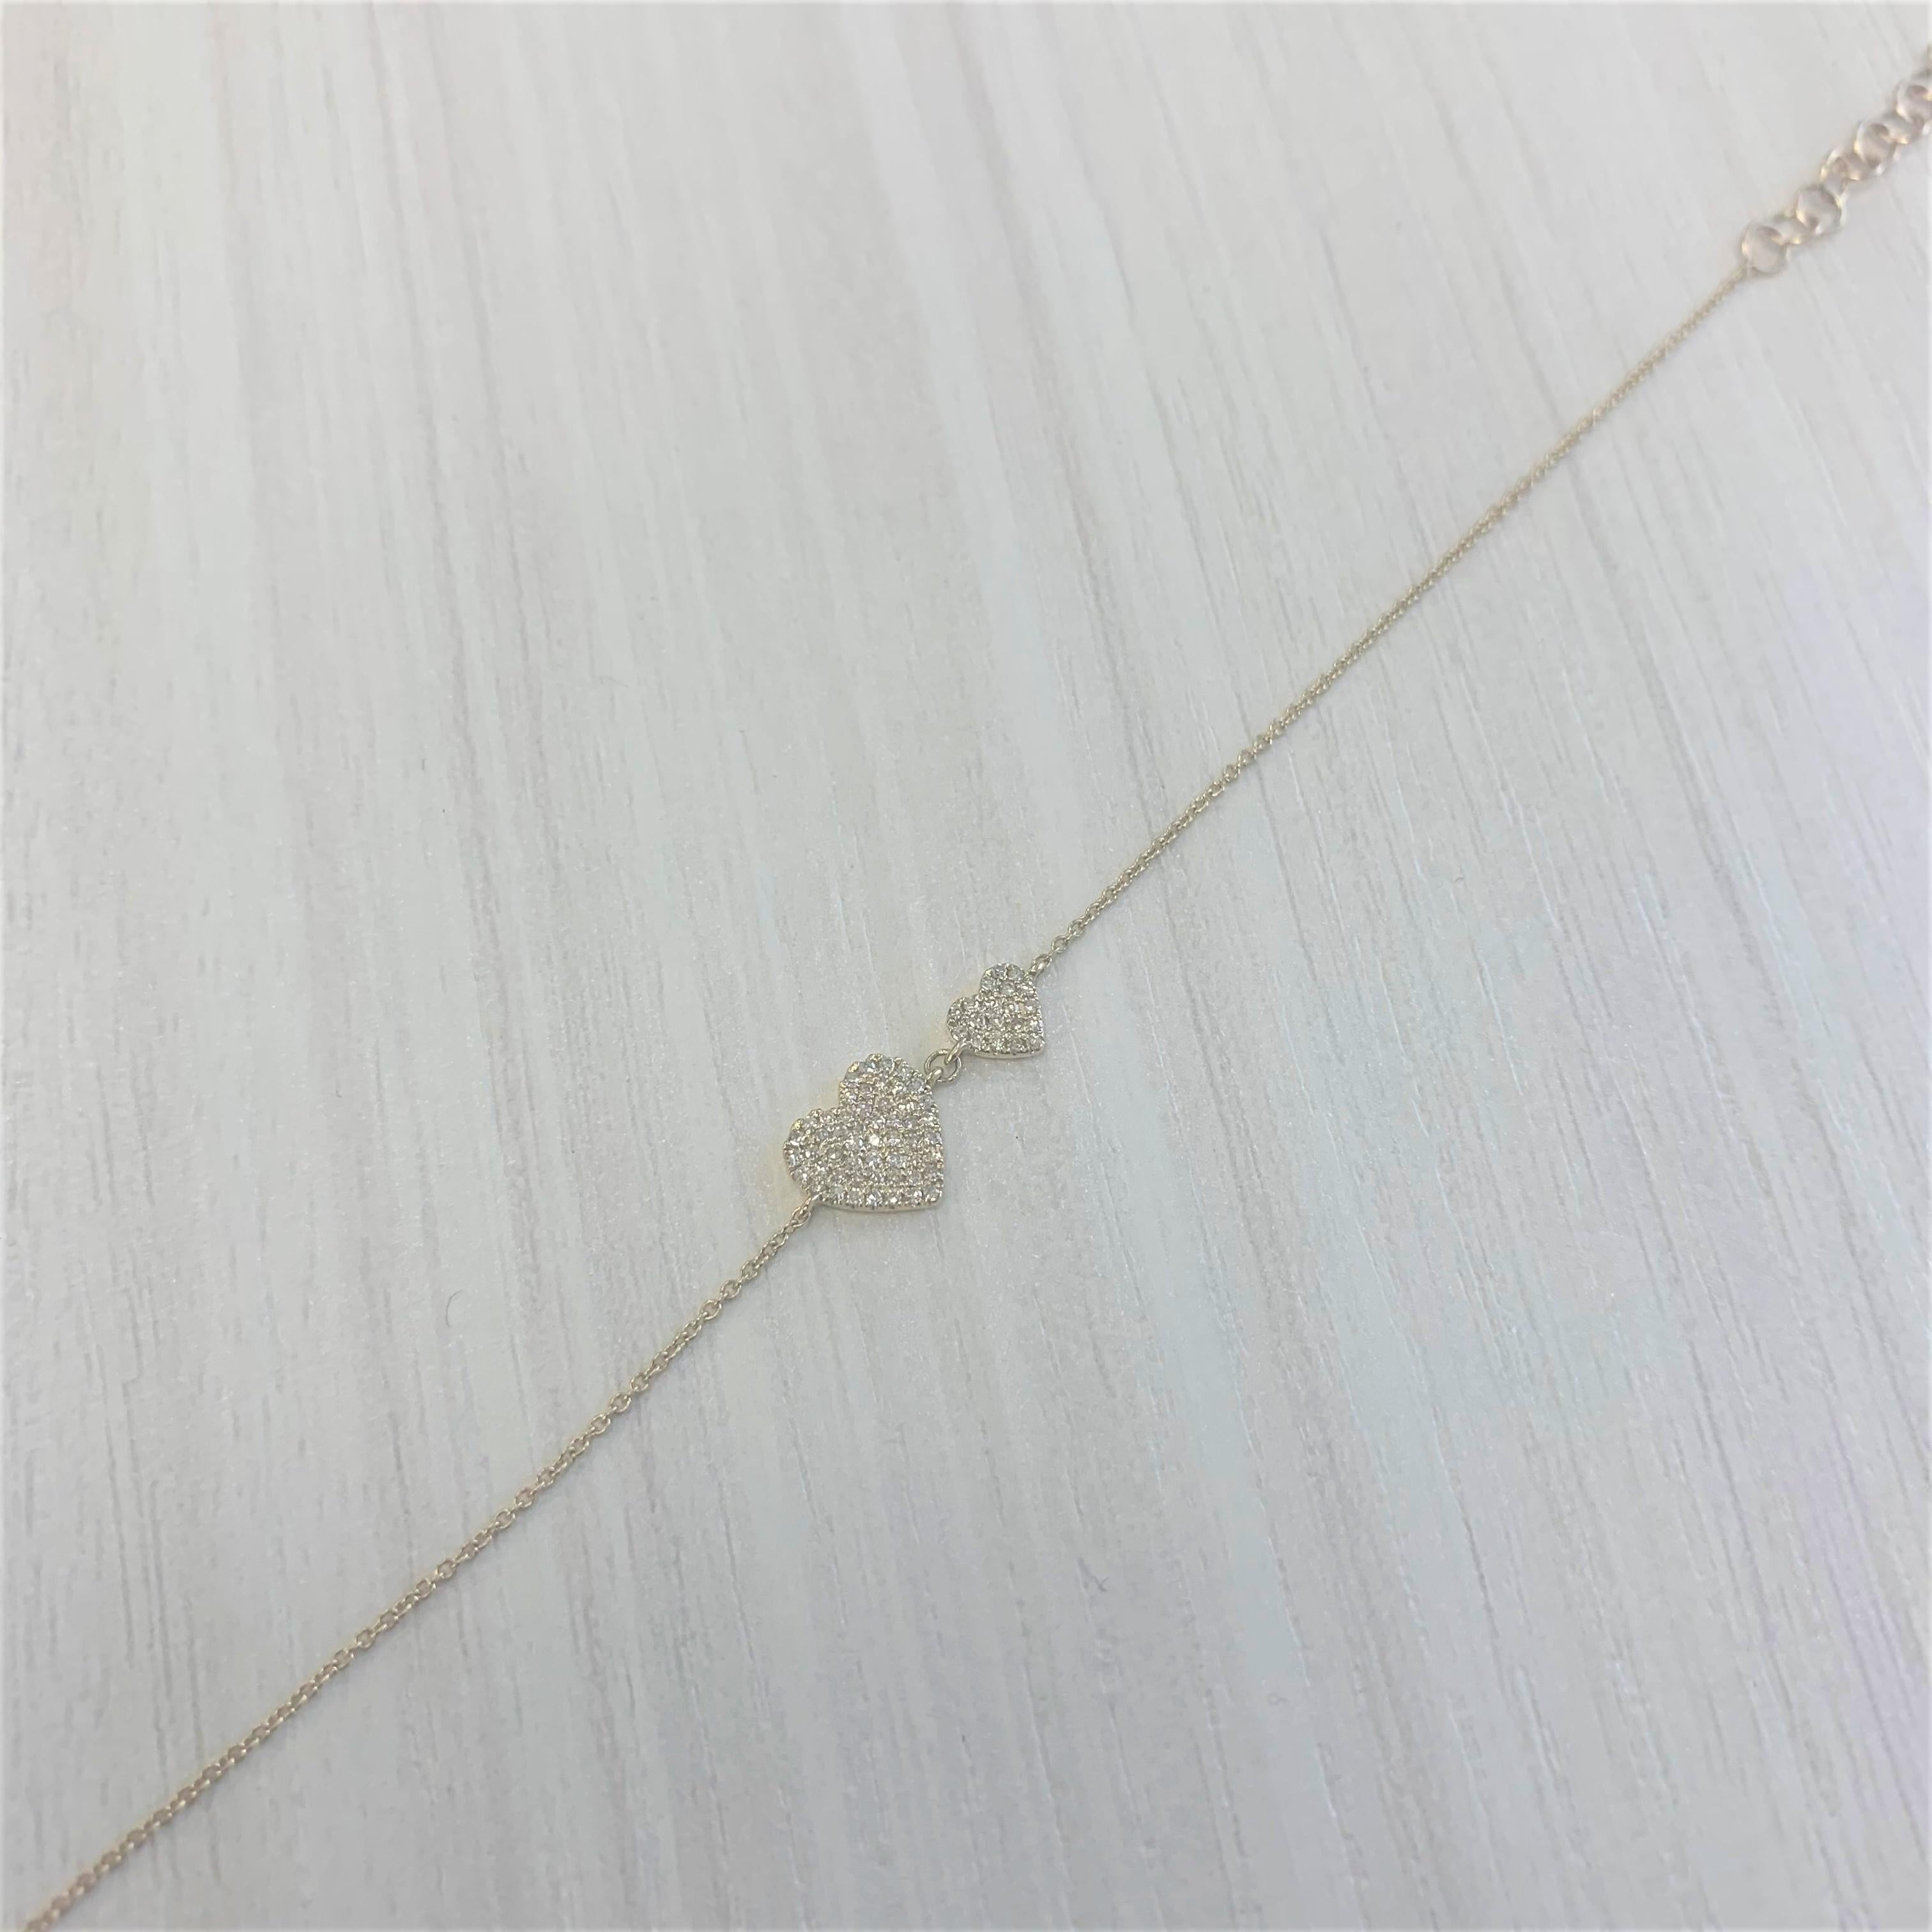 Heart Pave Chain Design Bracelet: This beautiful and eye-catching Heart Bracelet is made of 14K Gold and features 0.21 carats of natural round white Diamonds; the bracelet length is adjustable from 6.75